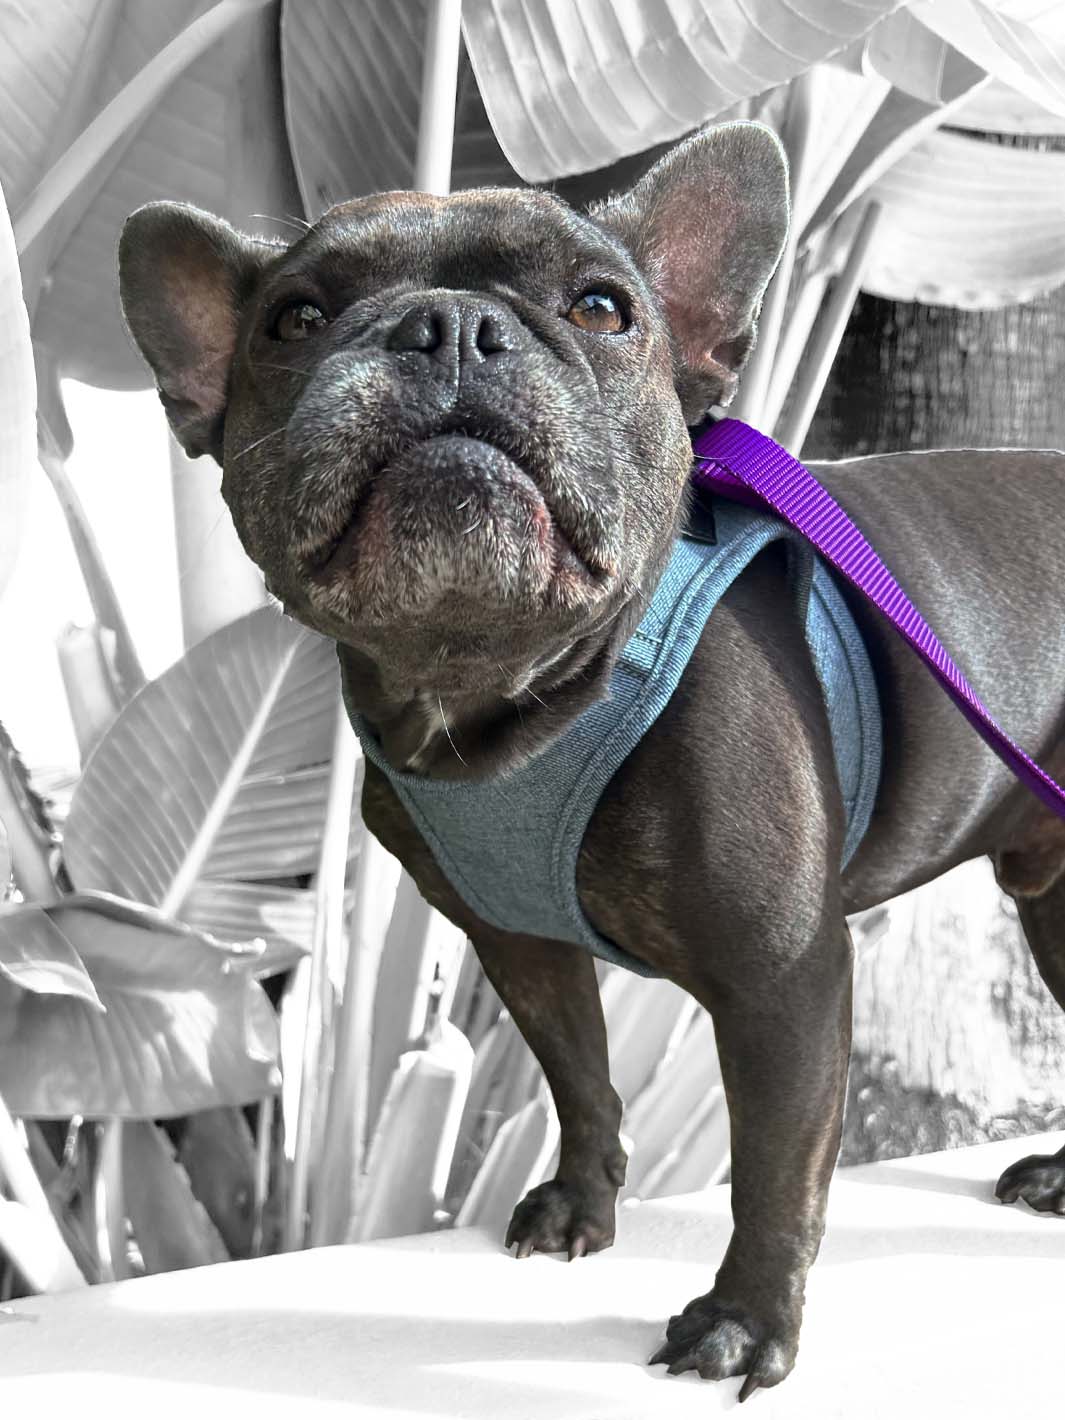 A french bulldog puppy is making a silly face and wearing cool dog harness made of blue denim.